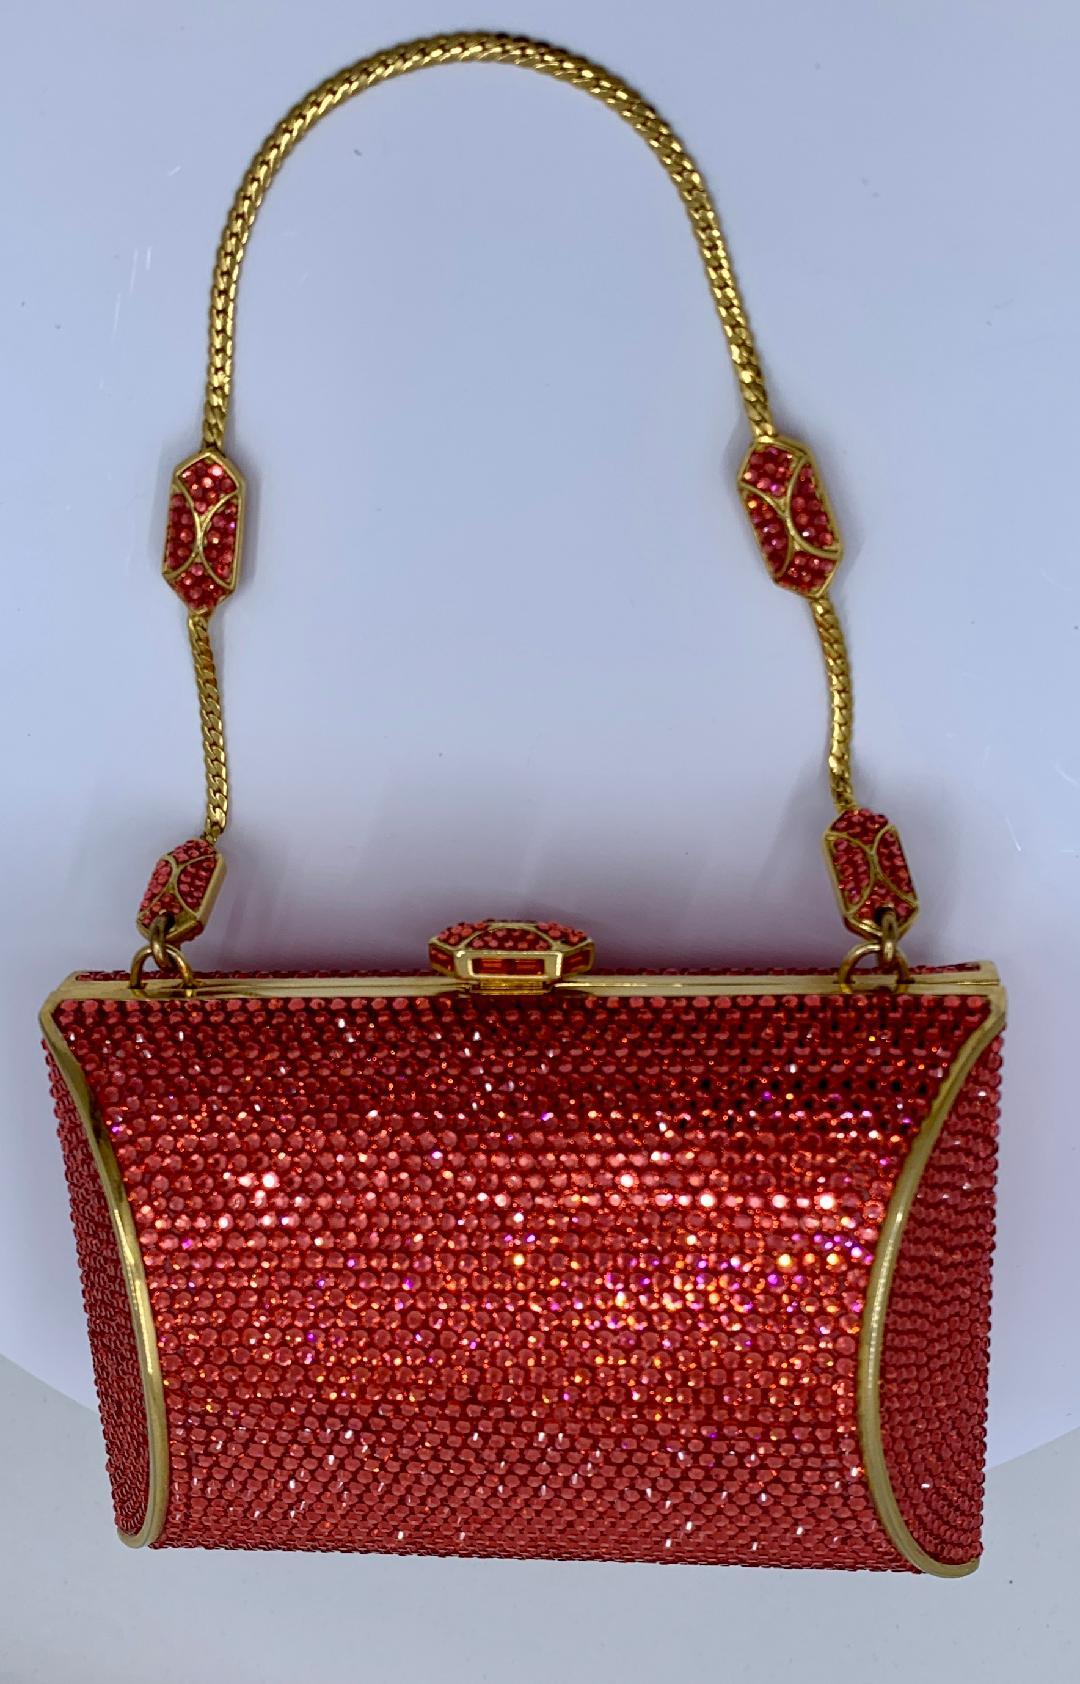 Exquisite handmade couture designer, Judith Leiber, crystal minaudiere evening bag or evening clutch is completely covered in coral colored crystals. Gold toned metal frame with metallic gold leather lined interior and a gold wrist chain is tucked